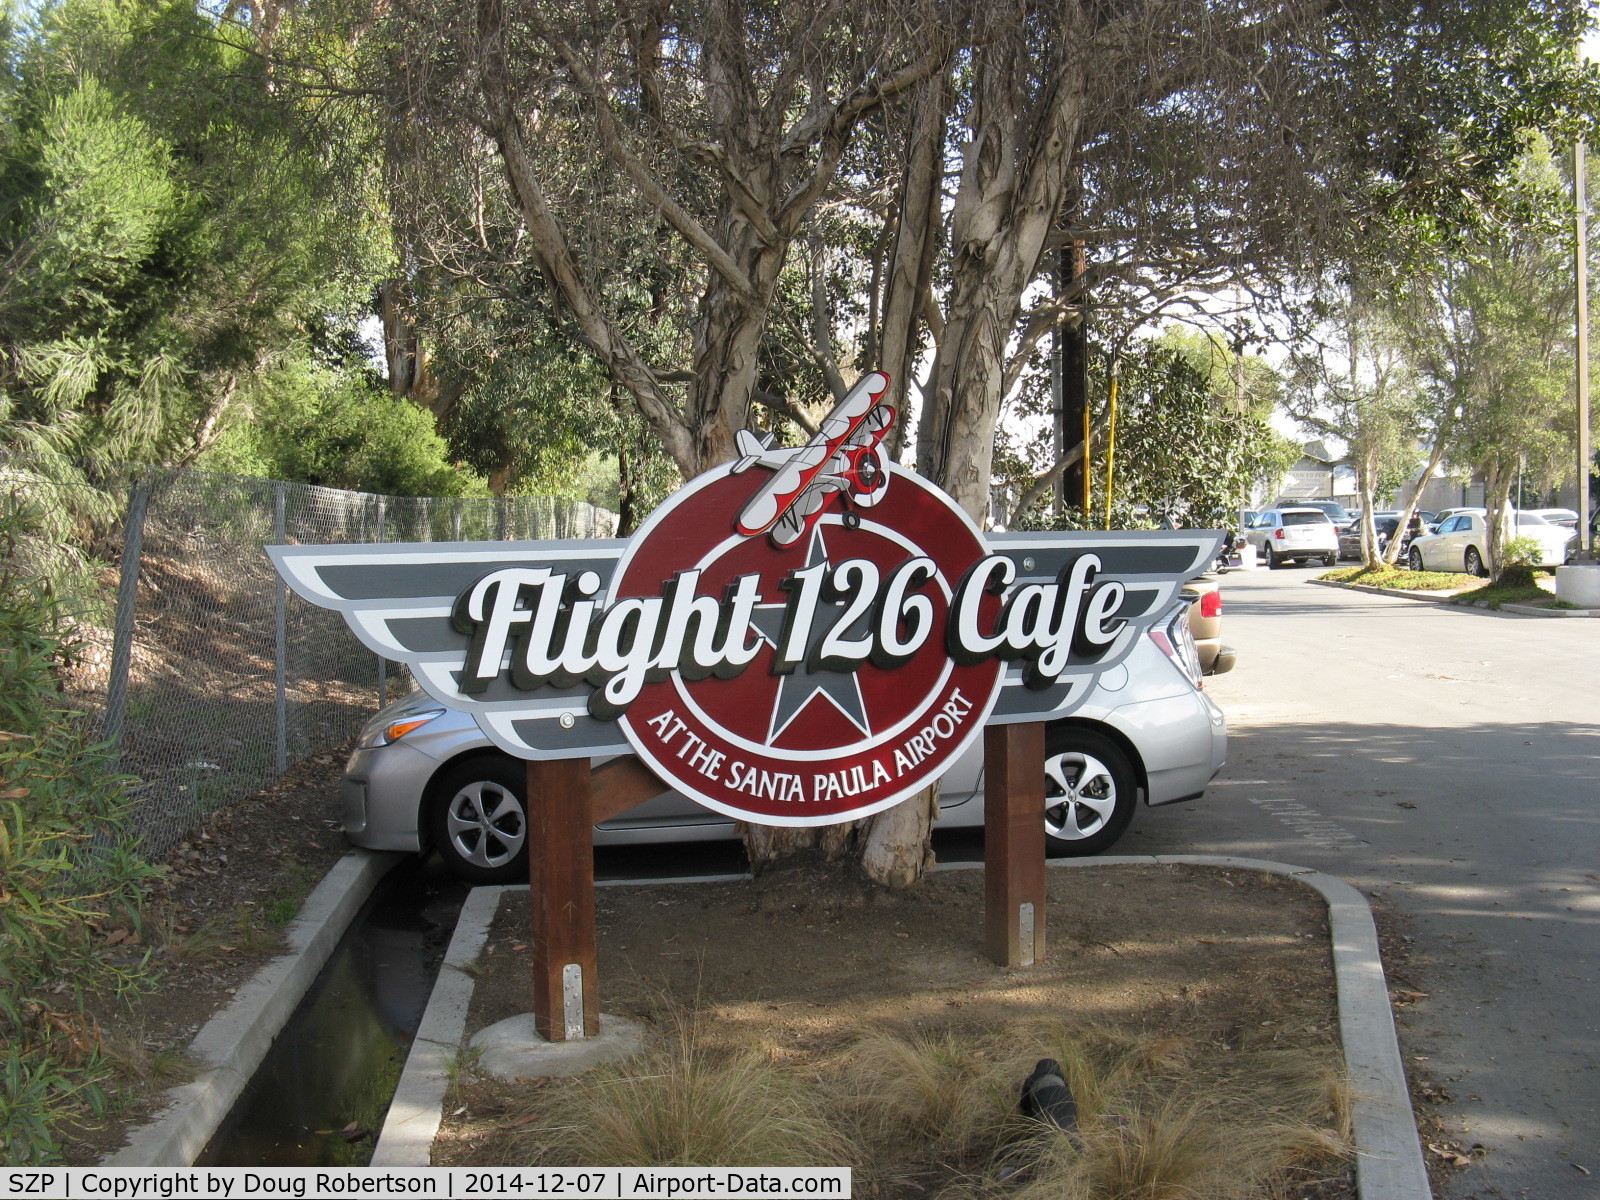 Santa Paula Airport (SZP) - Airport Restaurant sign at SZP airport entrance, replacing Logsdon's airport restaurant that closed. Flight 126 Cafe open for Breakfast and Lunch.